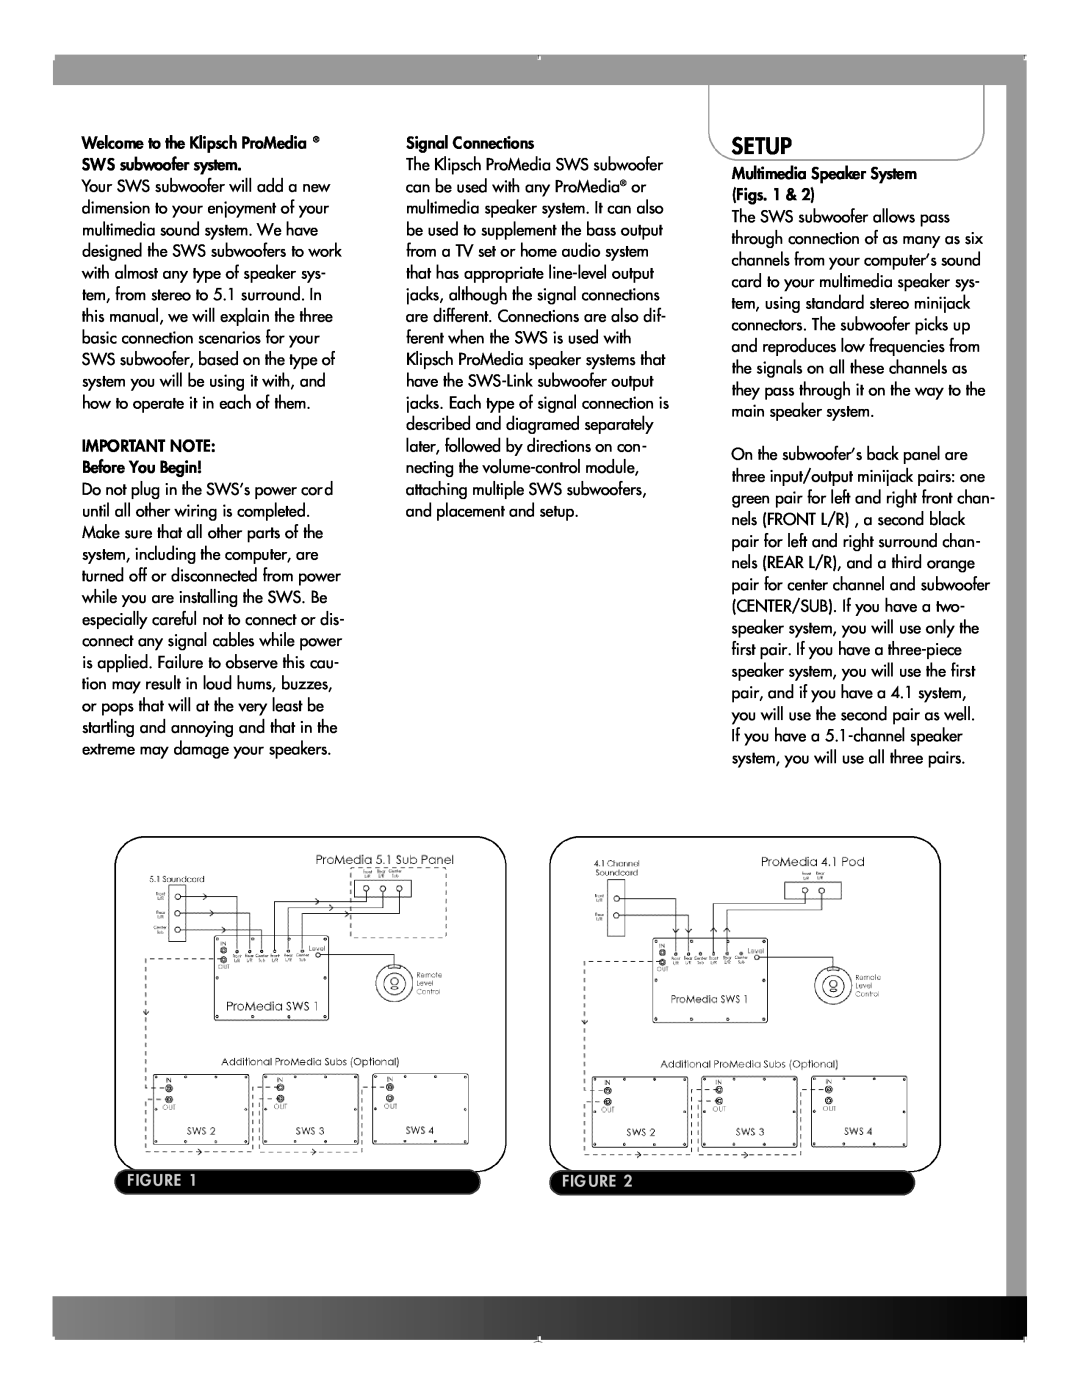 Klipsch SWS manual Setup, IMPORTANT NOTE Before You Begin, Signal Connections, Multimedia Speaker System Figs 